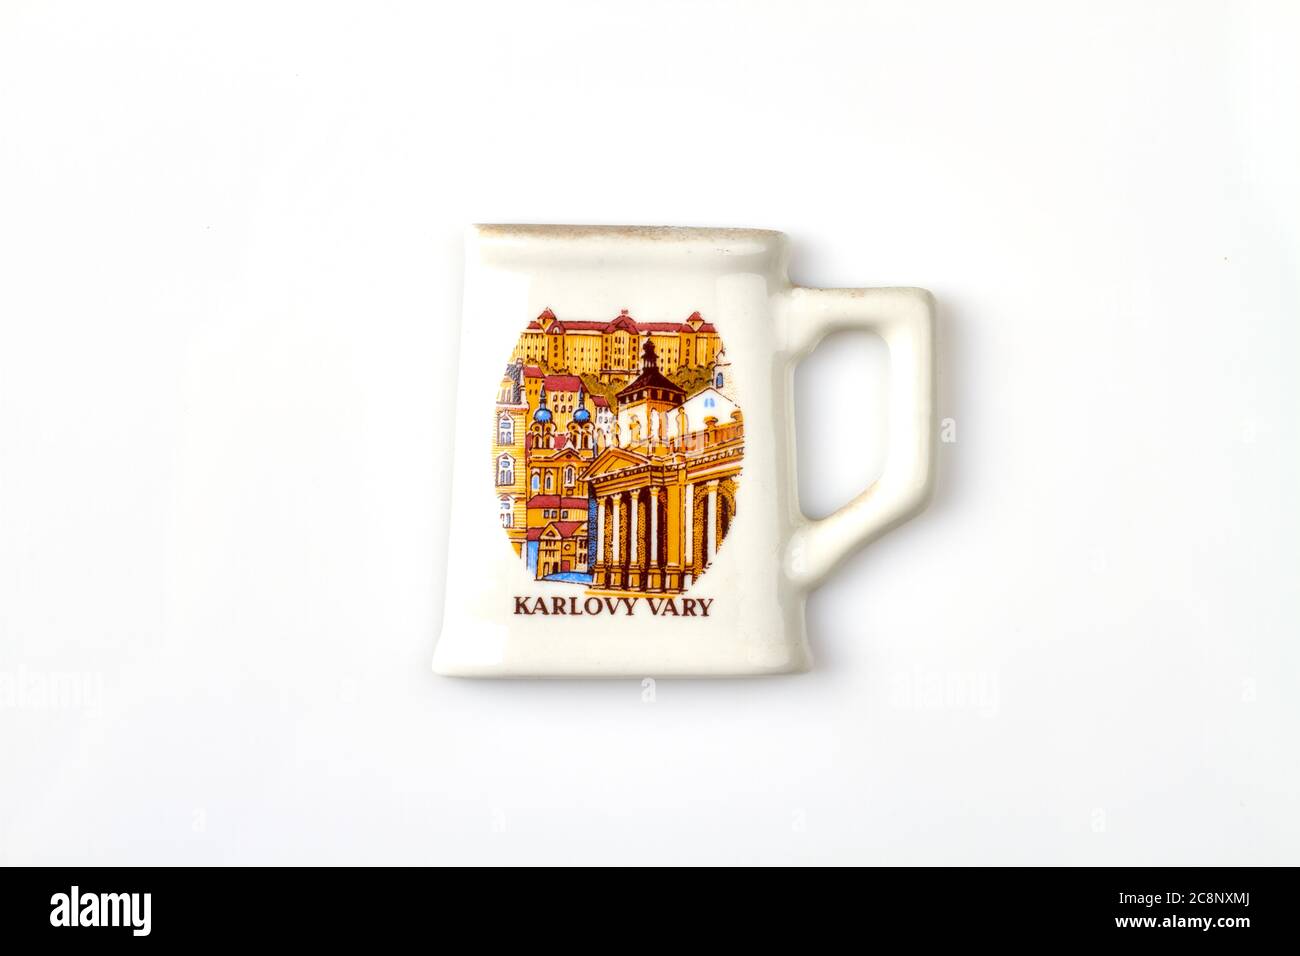 White cup with Karlovy vary image. Stock Photo